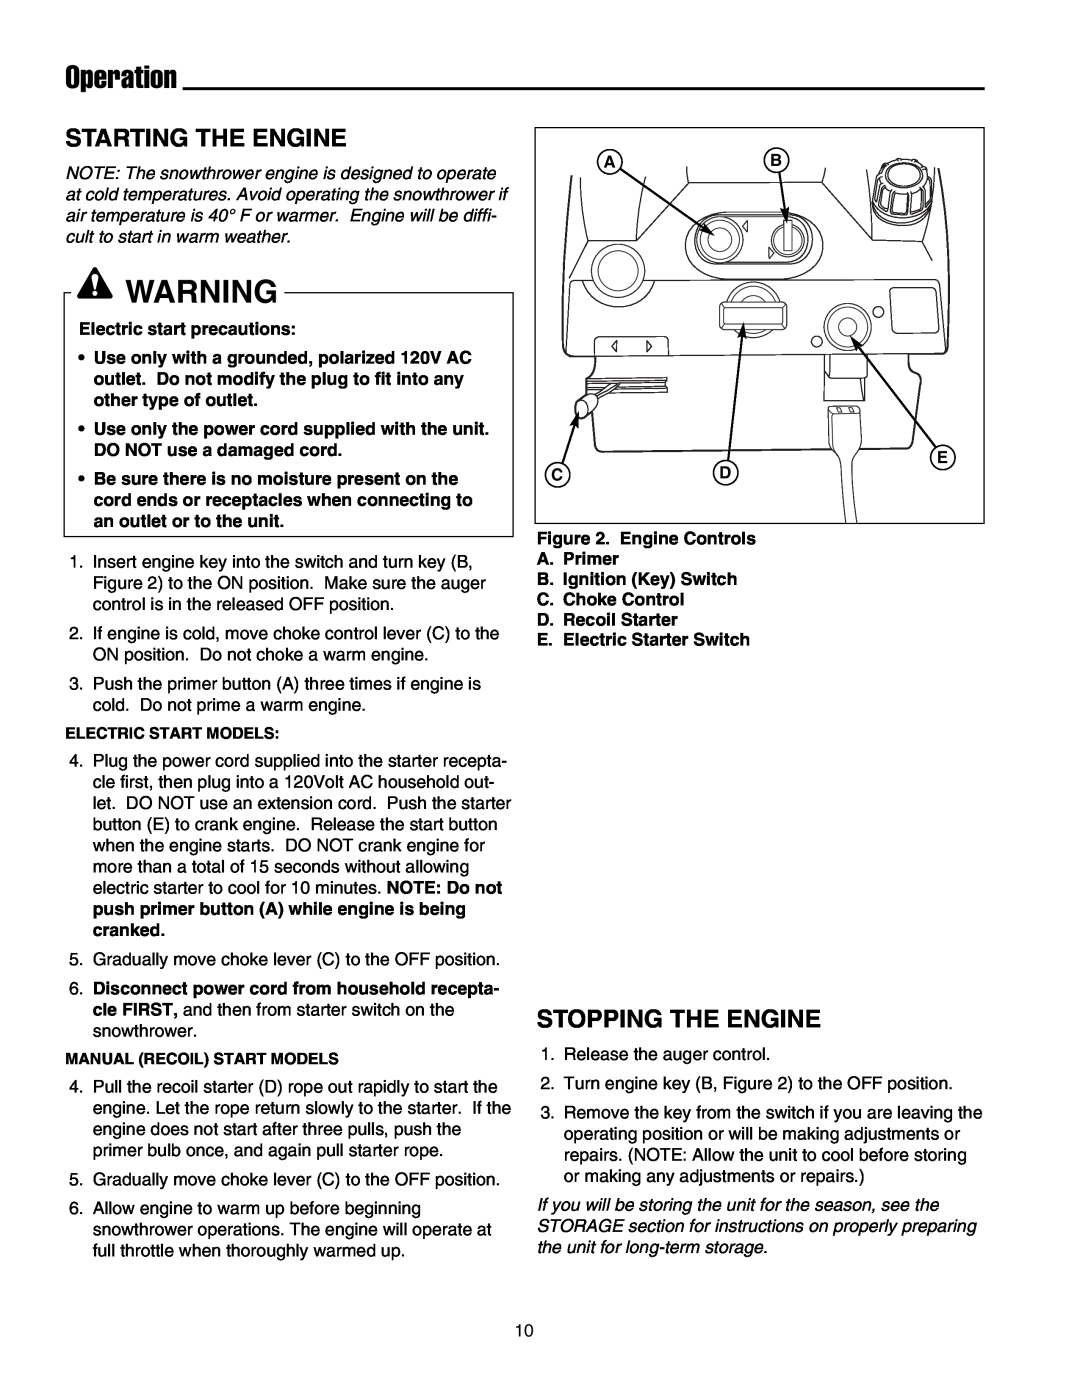 Simplicity 1694584 319E, 1694583 319M instruction sheet Starting The Engine, Stopping The Engine, Operation 